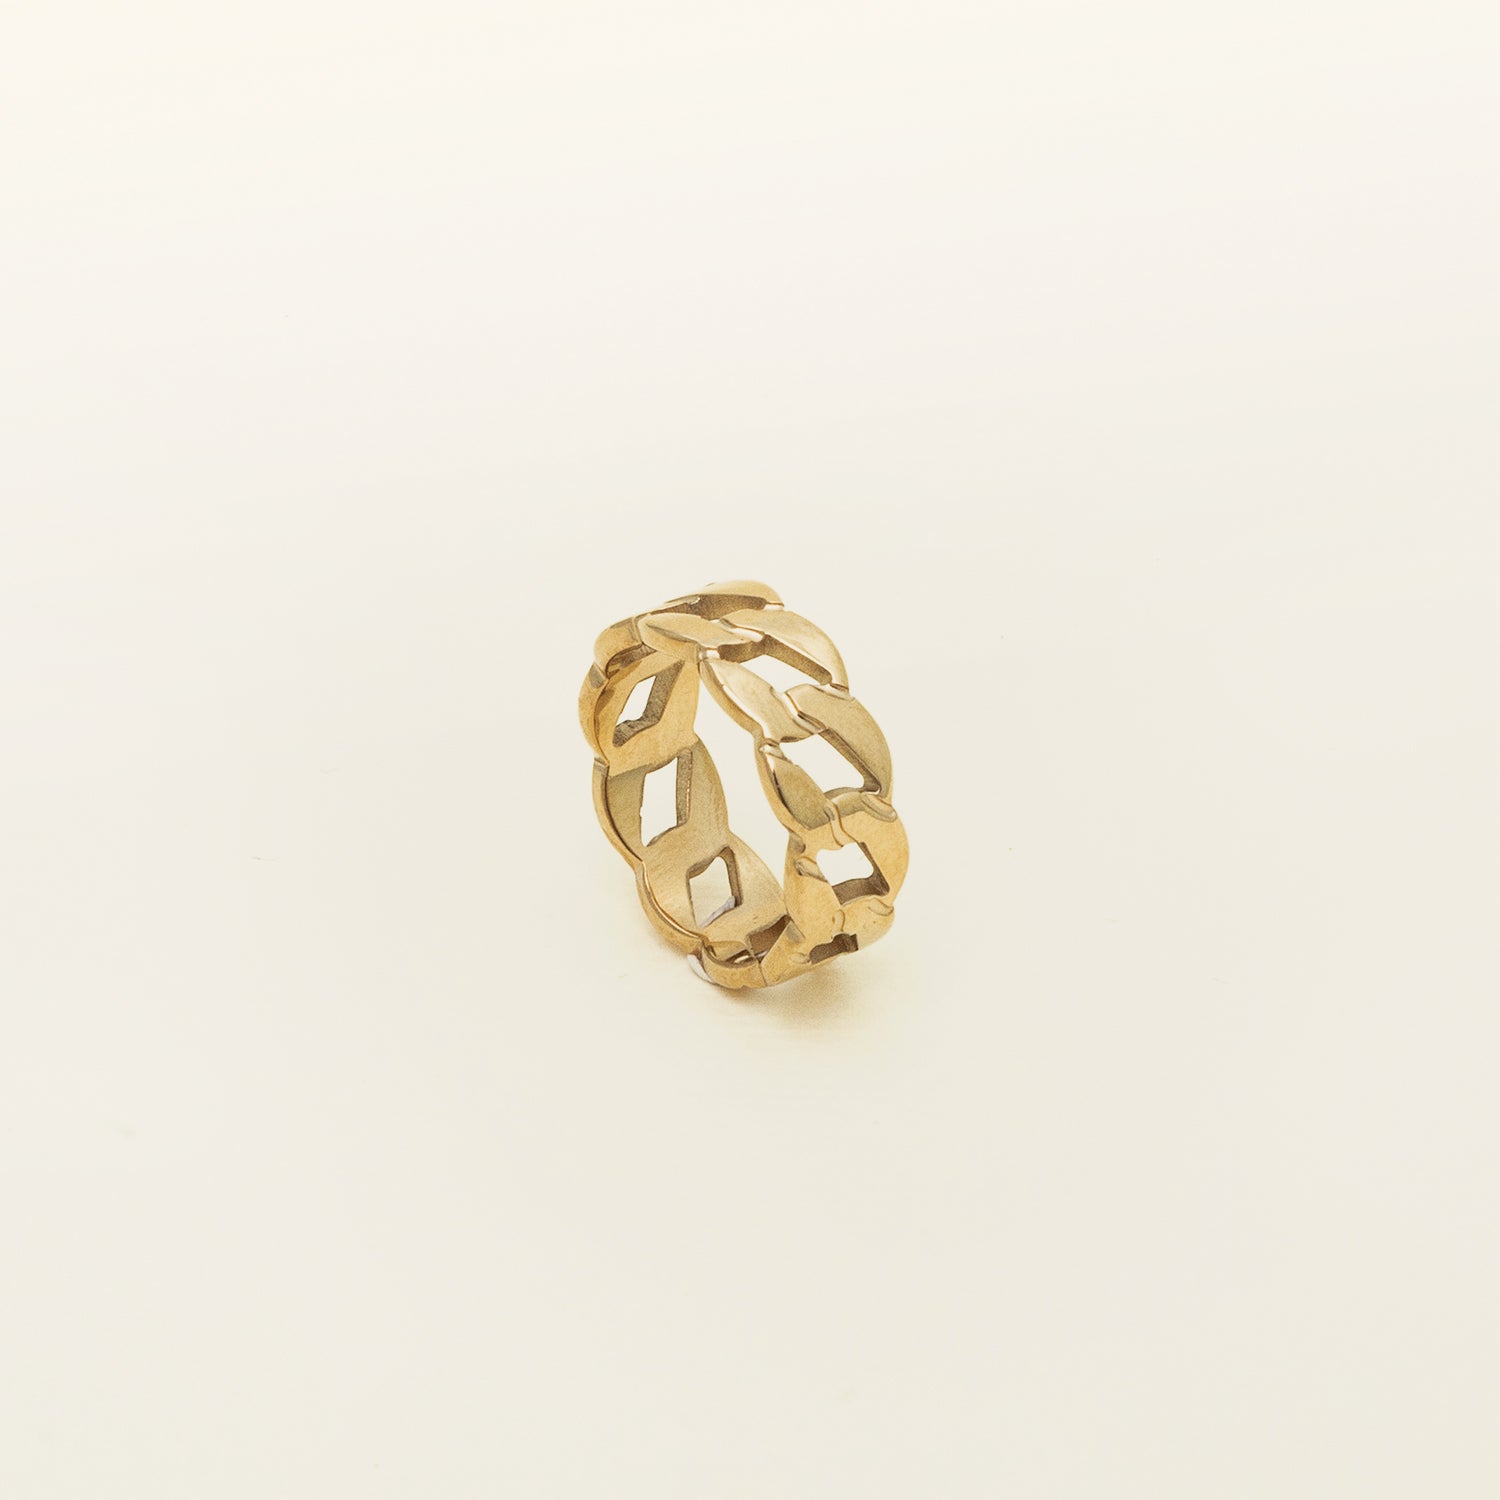 Image of the Cuban Link Chain Ring, crafted with 18K gold plating on stainless steel, delivering dependable protection from discoloration and water damage. Its unique design exudes a fashionable air, certain to make an impression.